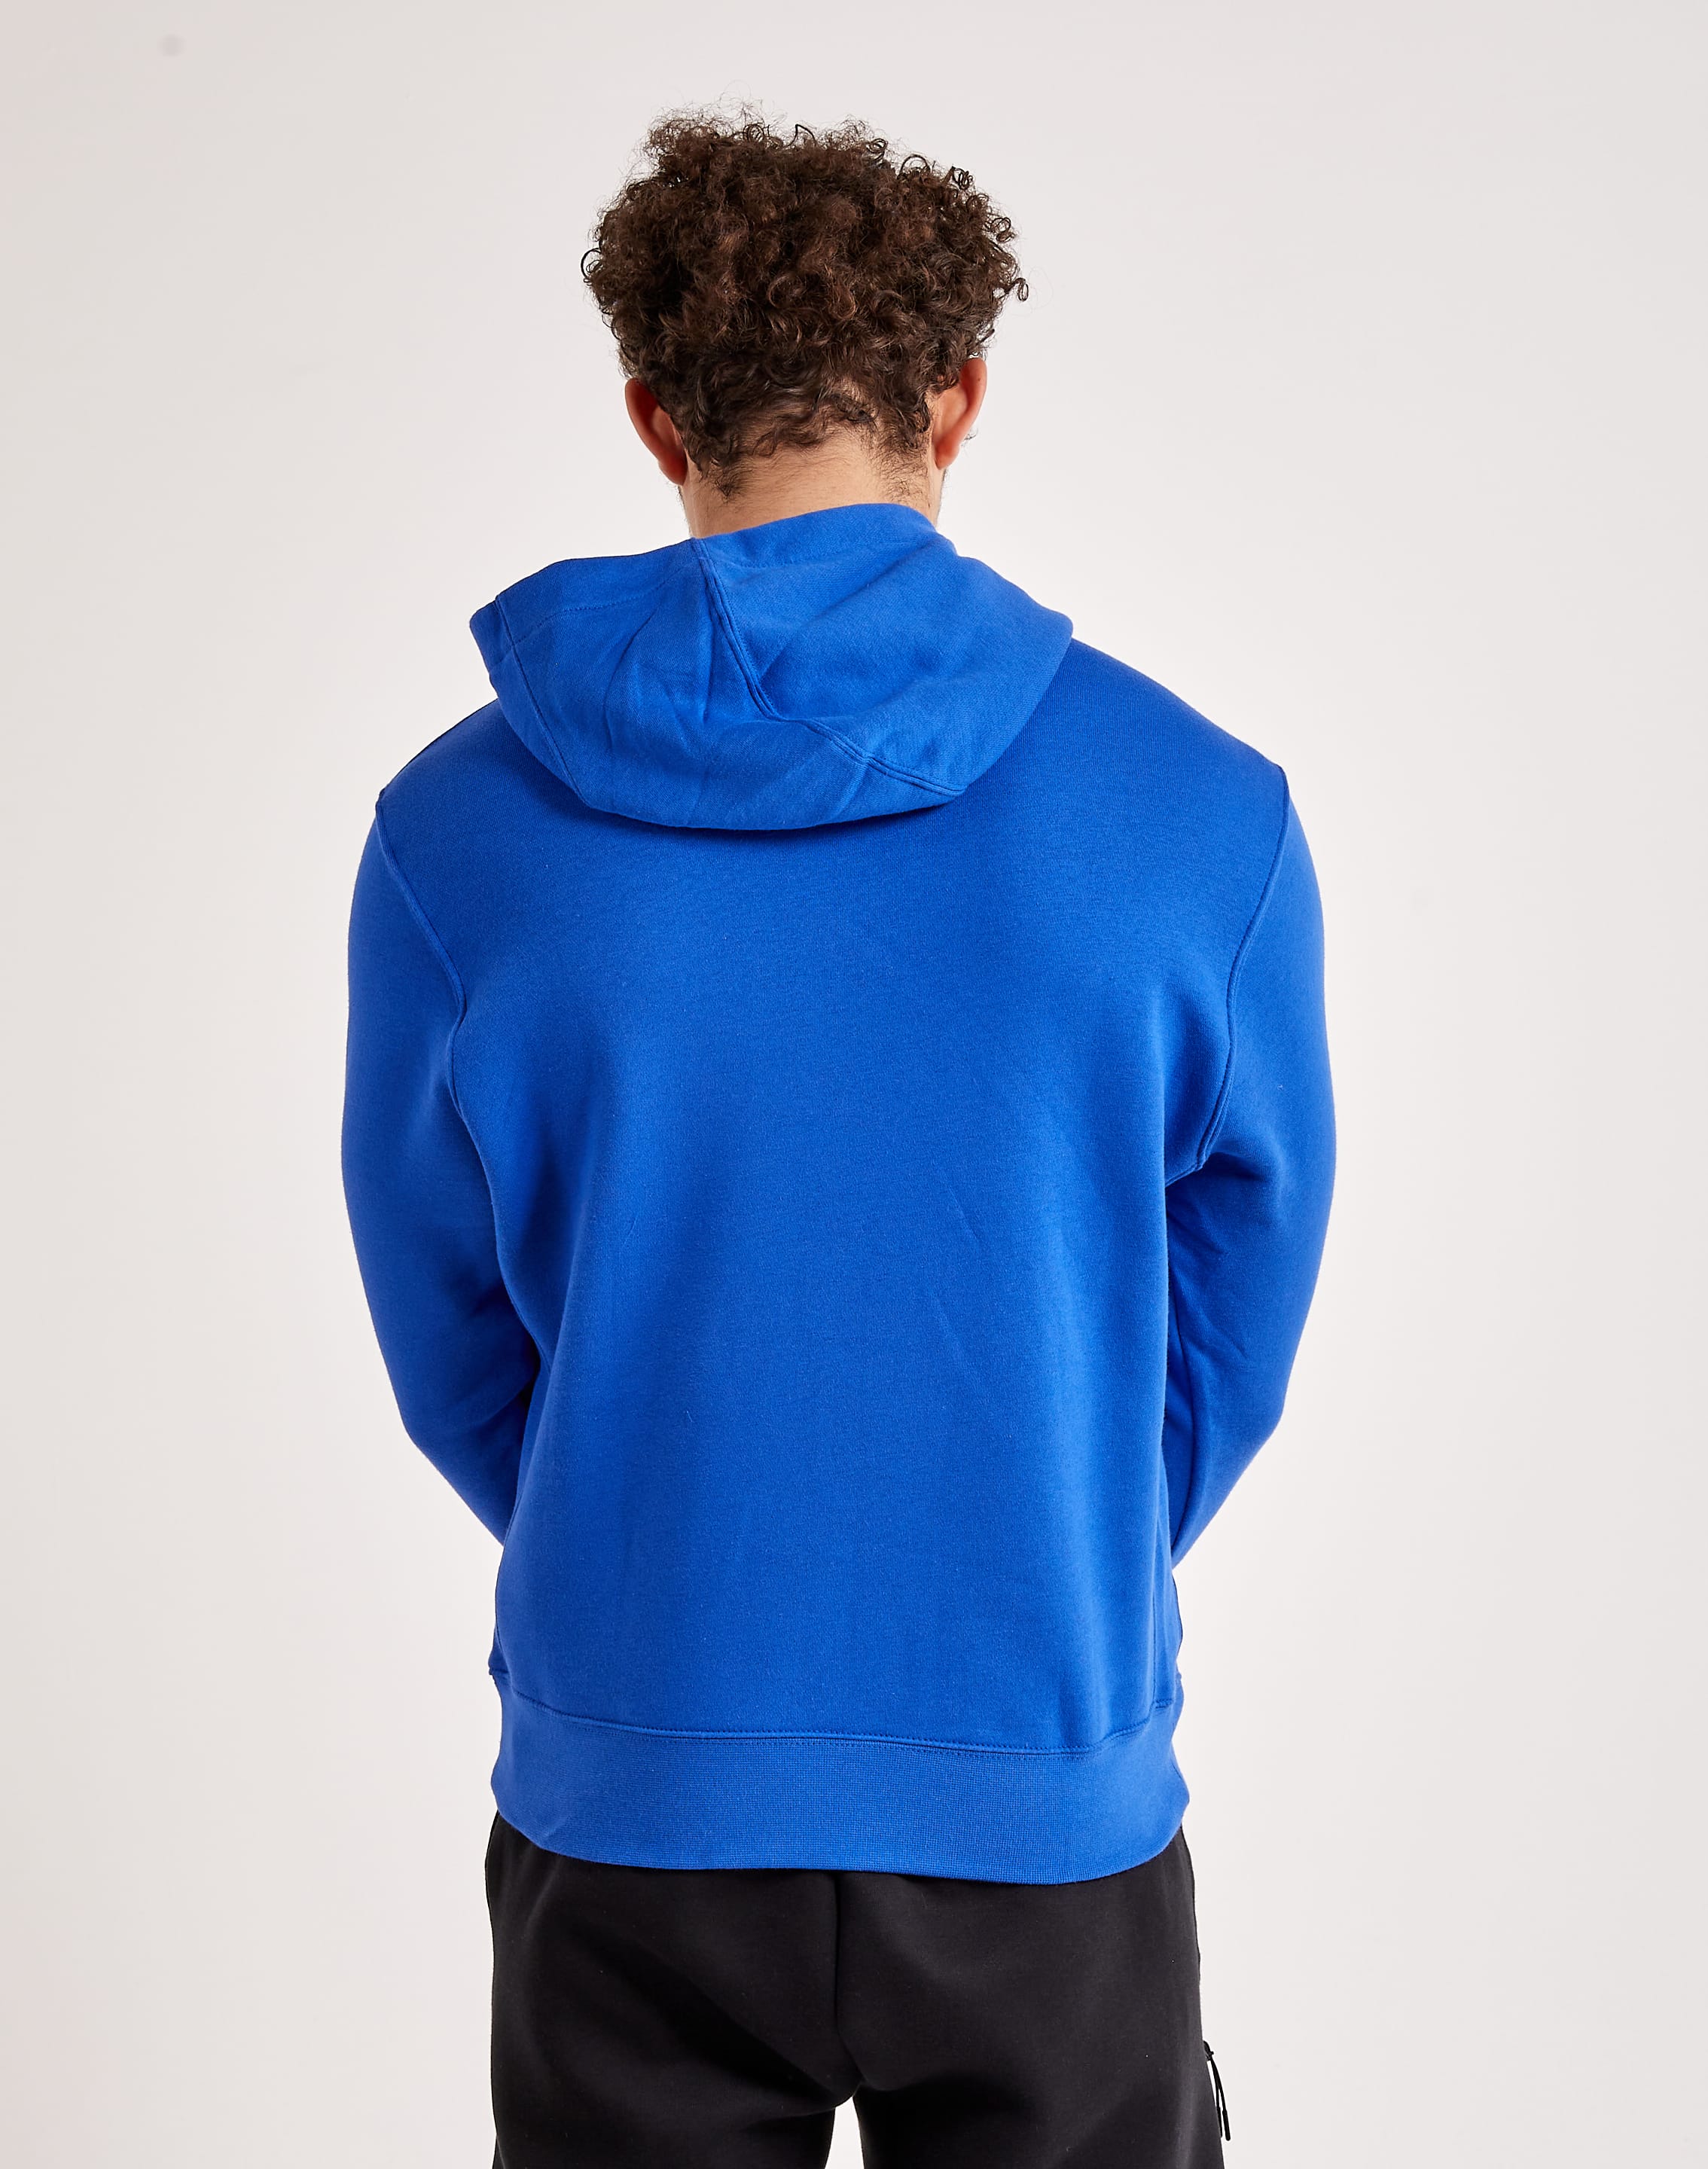 NIKE CLUB FLEECE PULL OVER HOODIE - Team Outfitters